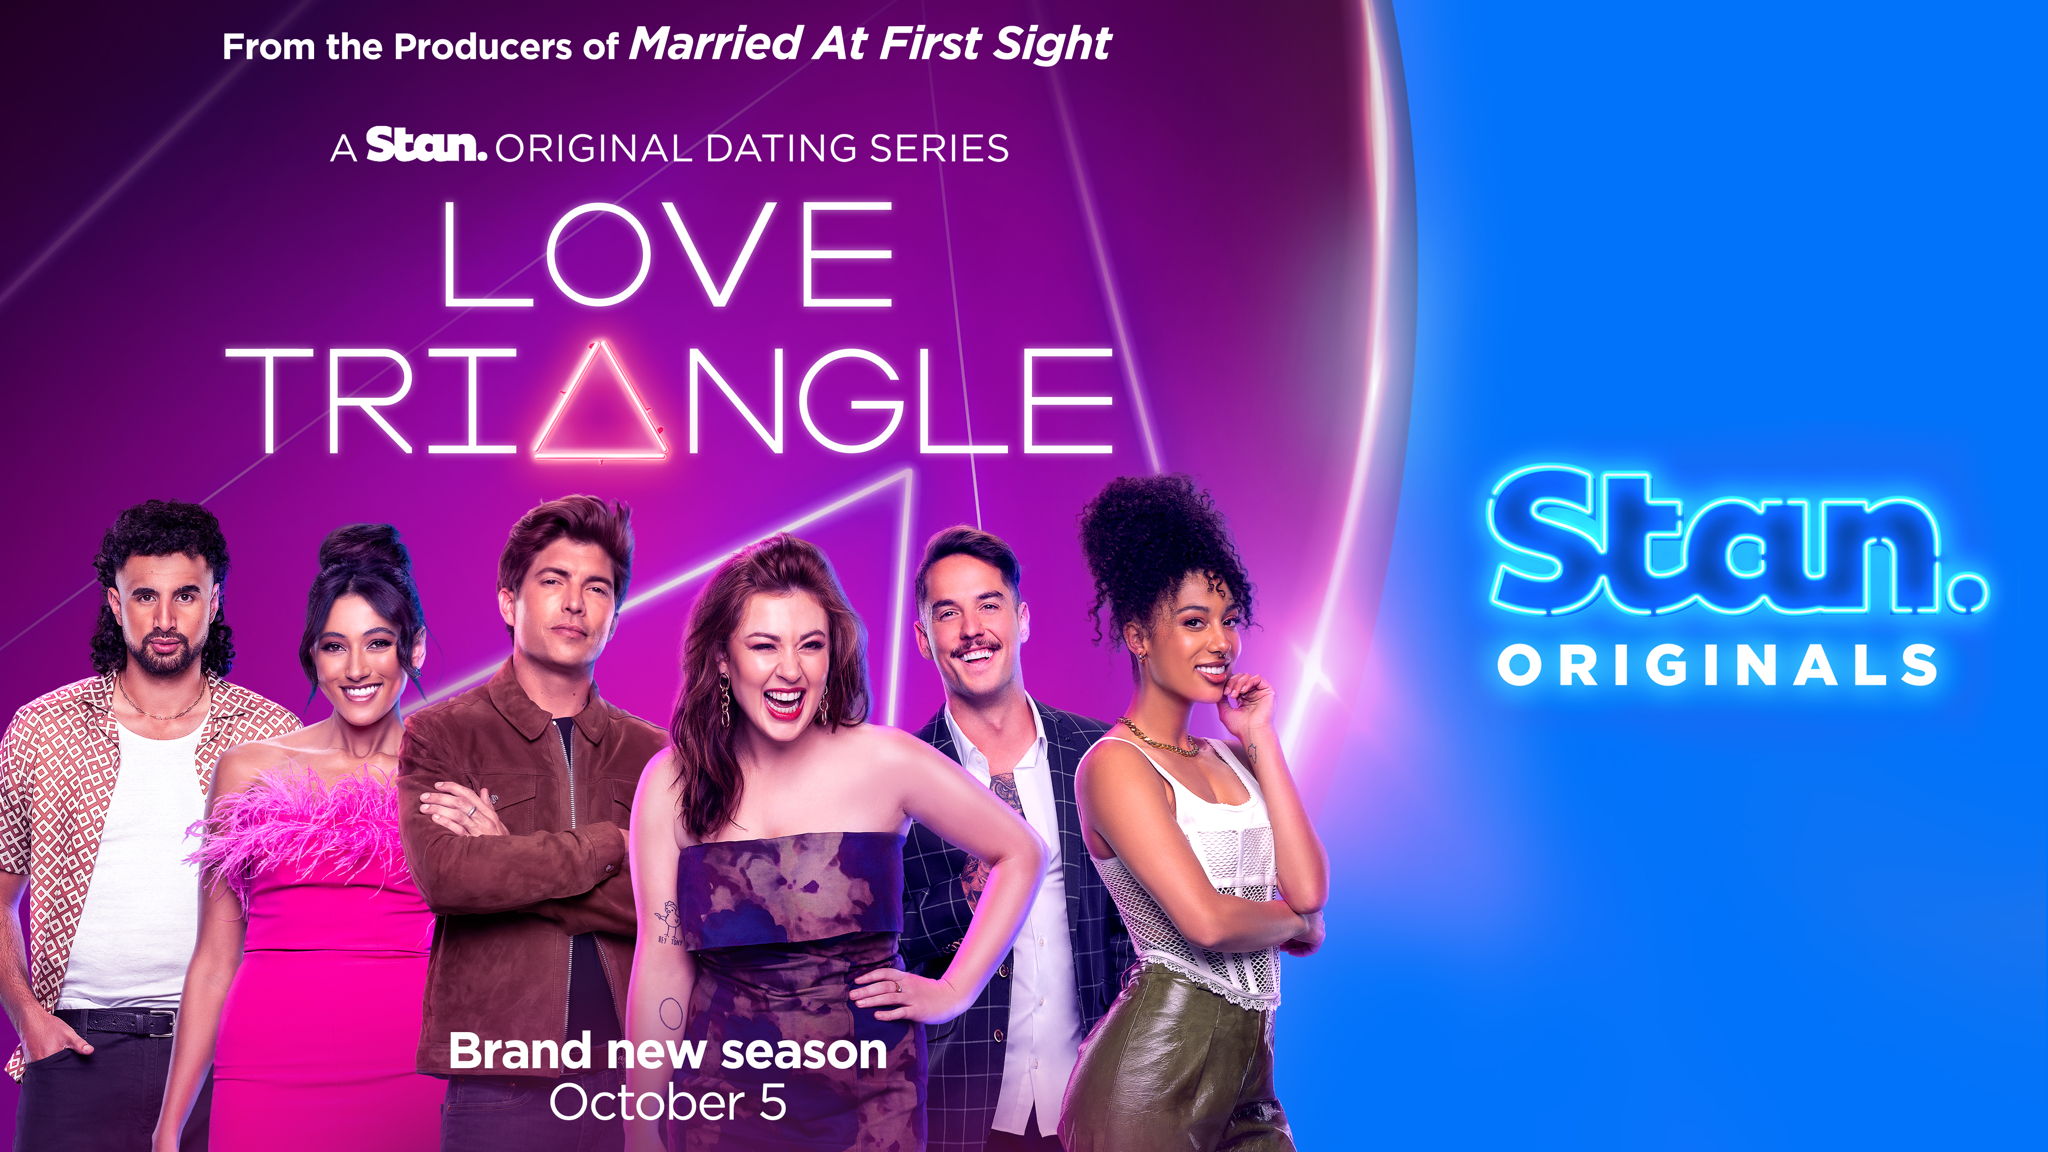 Star of new Stan dating series Love Triangle details a creepy date night  that went horribly wrong